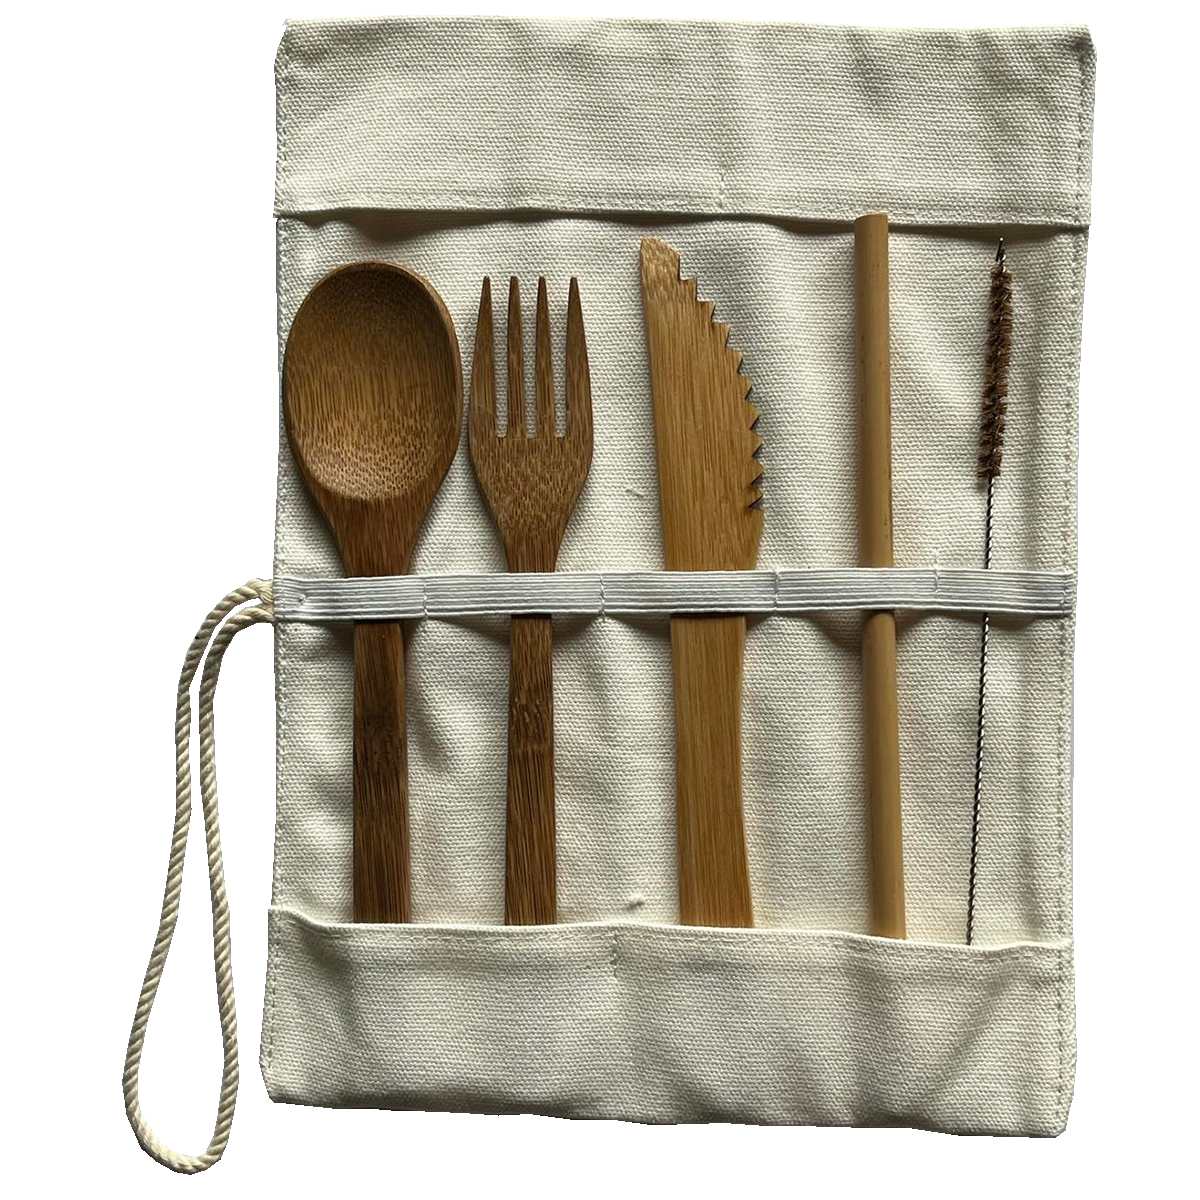 Bamboo cutlery set with organic cotton case